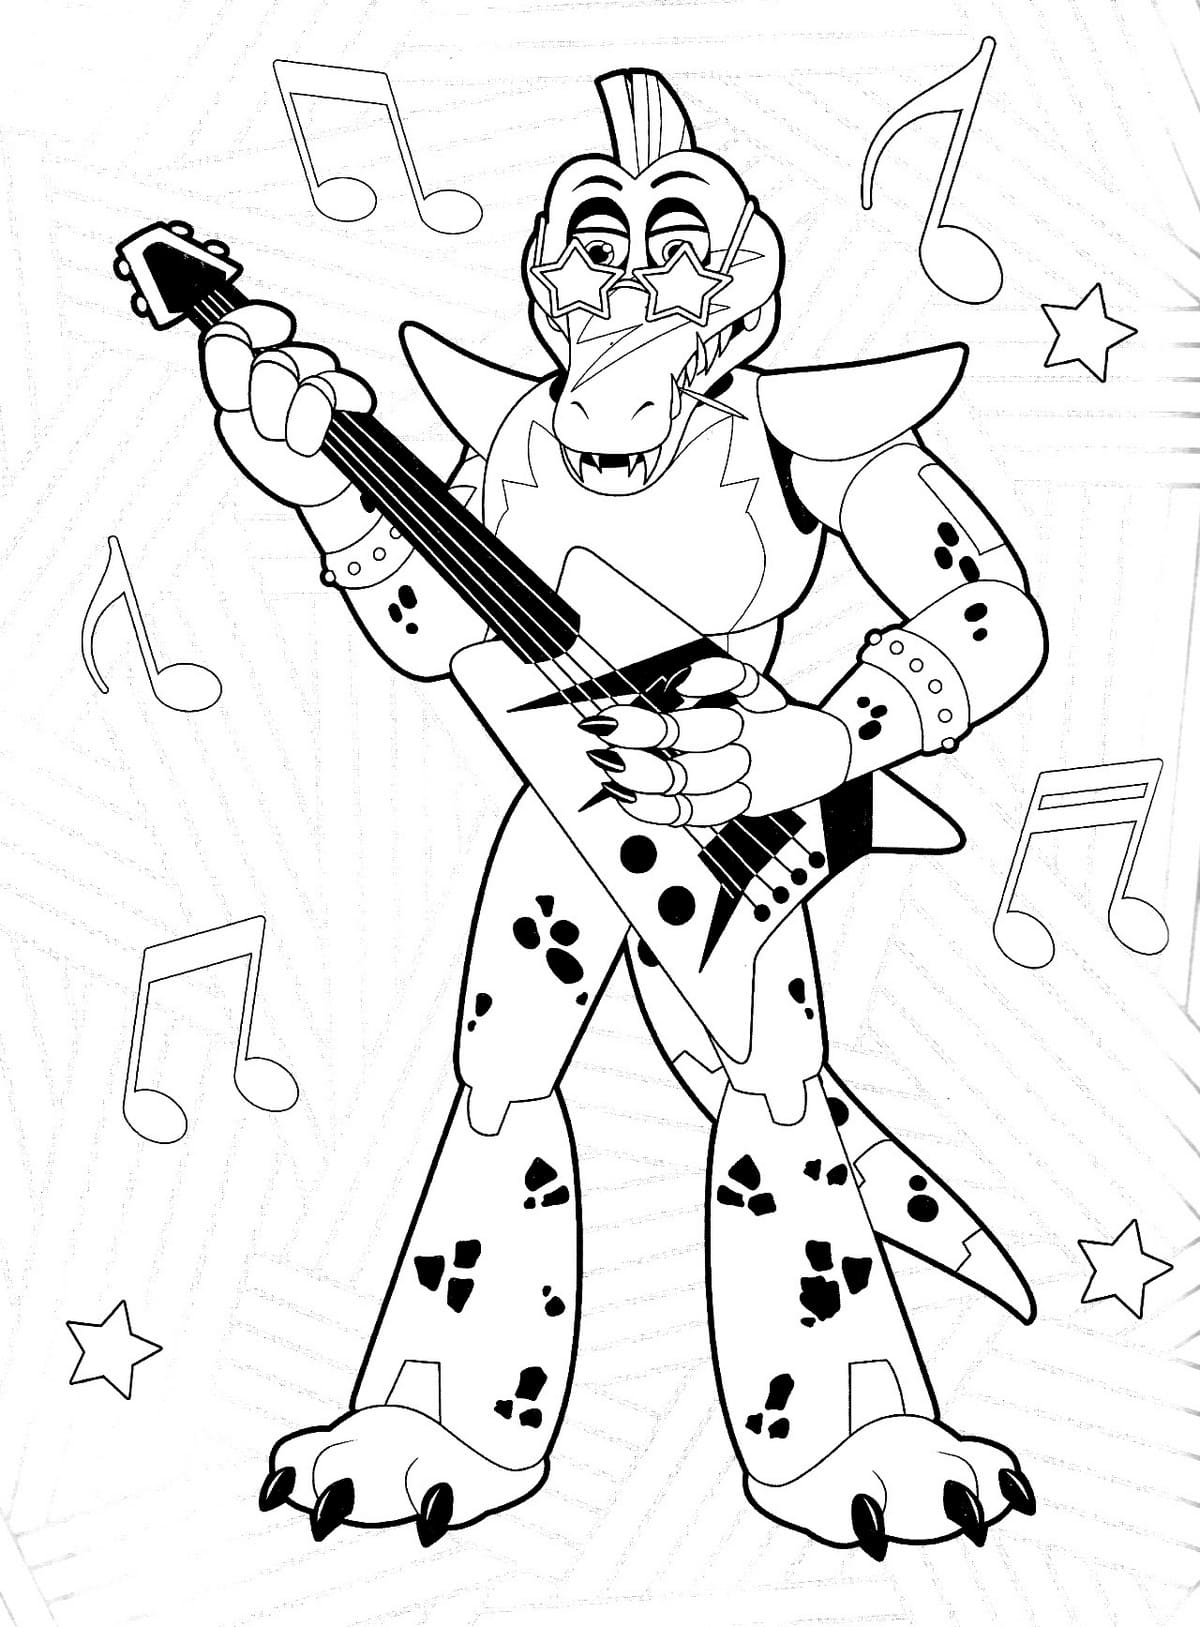 Coloring page Monty Monty and the guitar